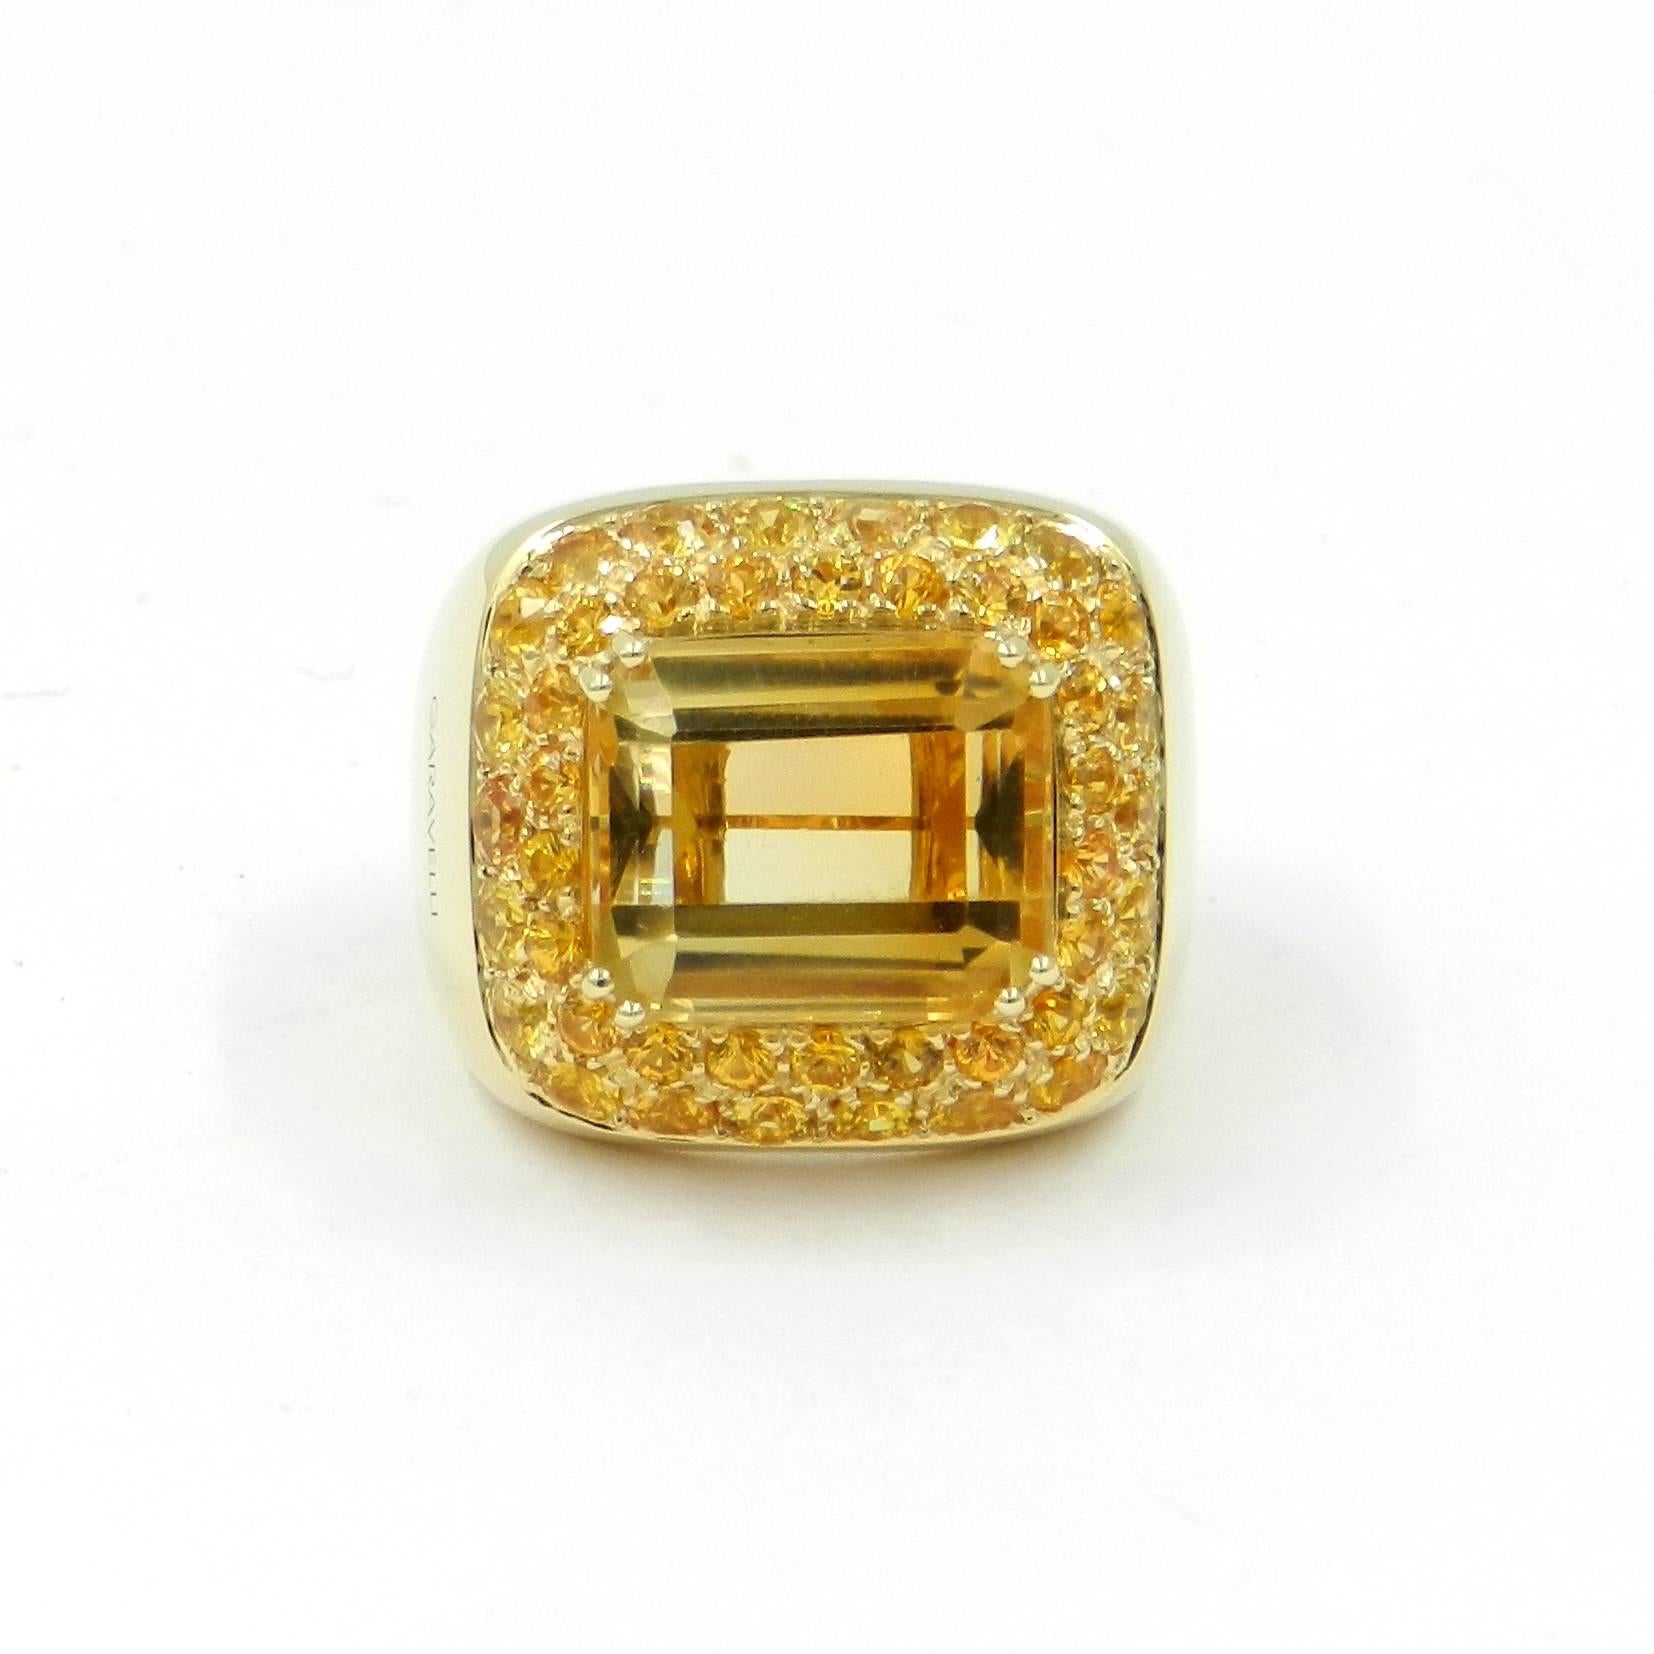 citrine and yellow sapphire are same